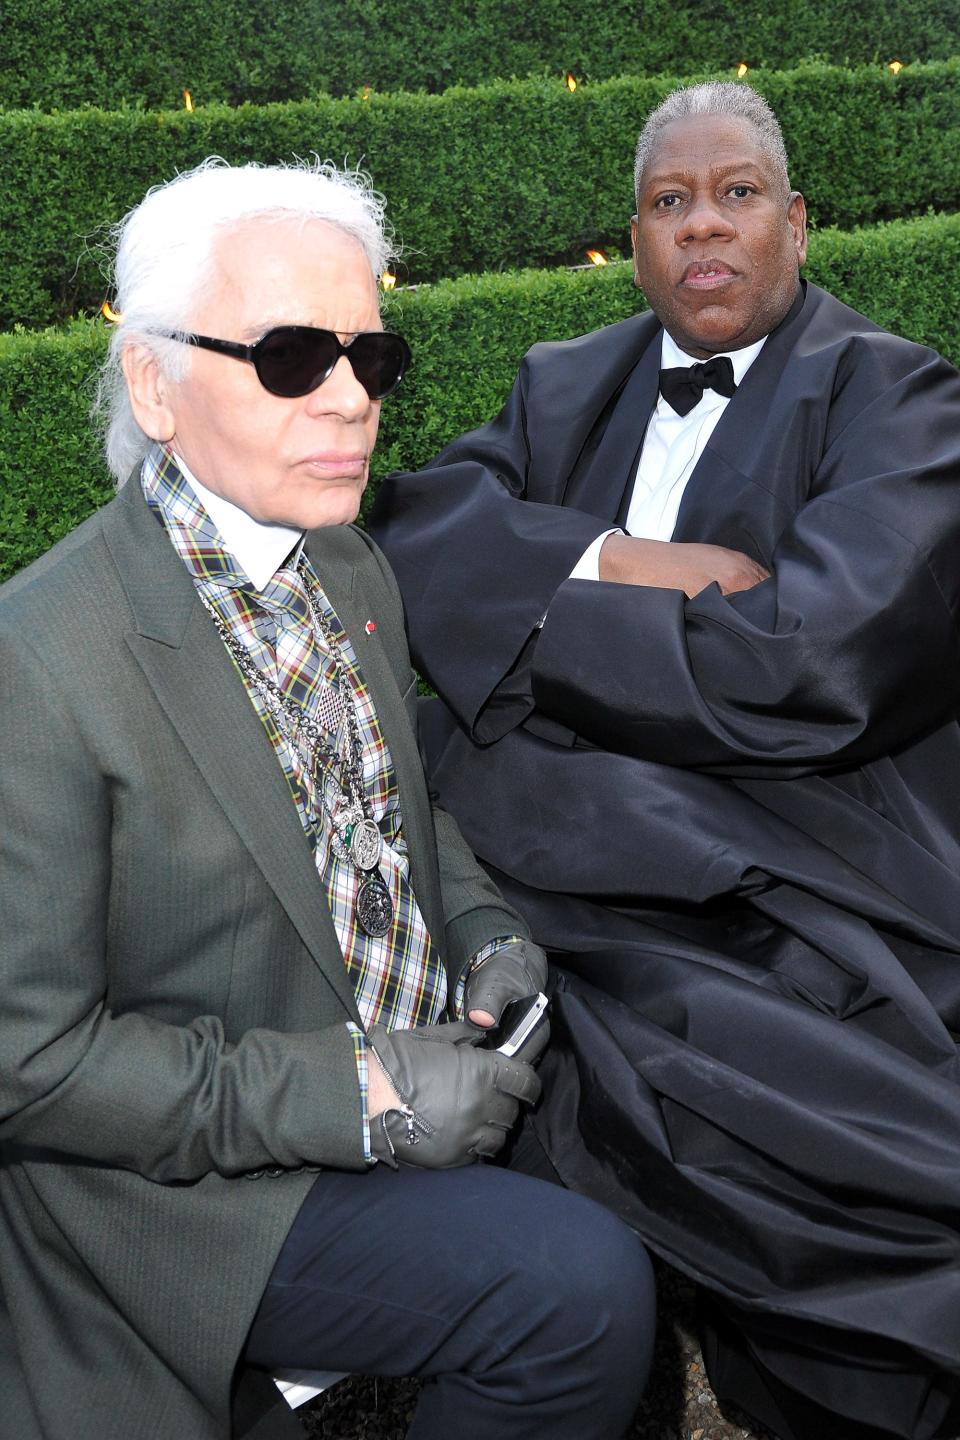 Karl Lagerfeld, left, and André Leon Talley pose during the Chanel 2012-13 Cruise Collection at Chateau de Versailles on May 14, 2012, in Versailles, France.